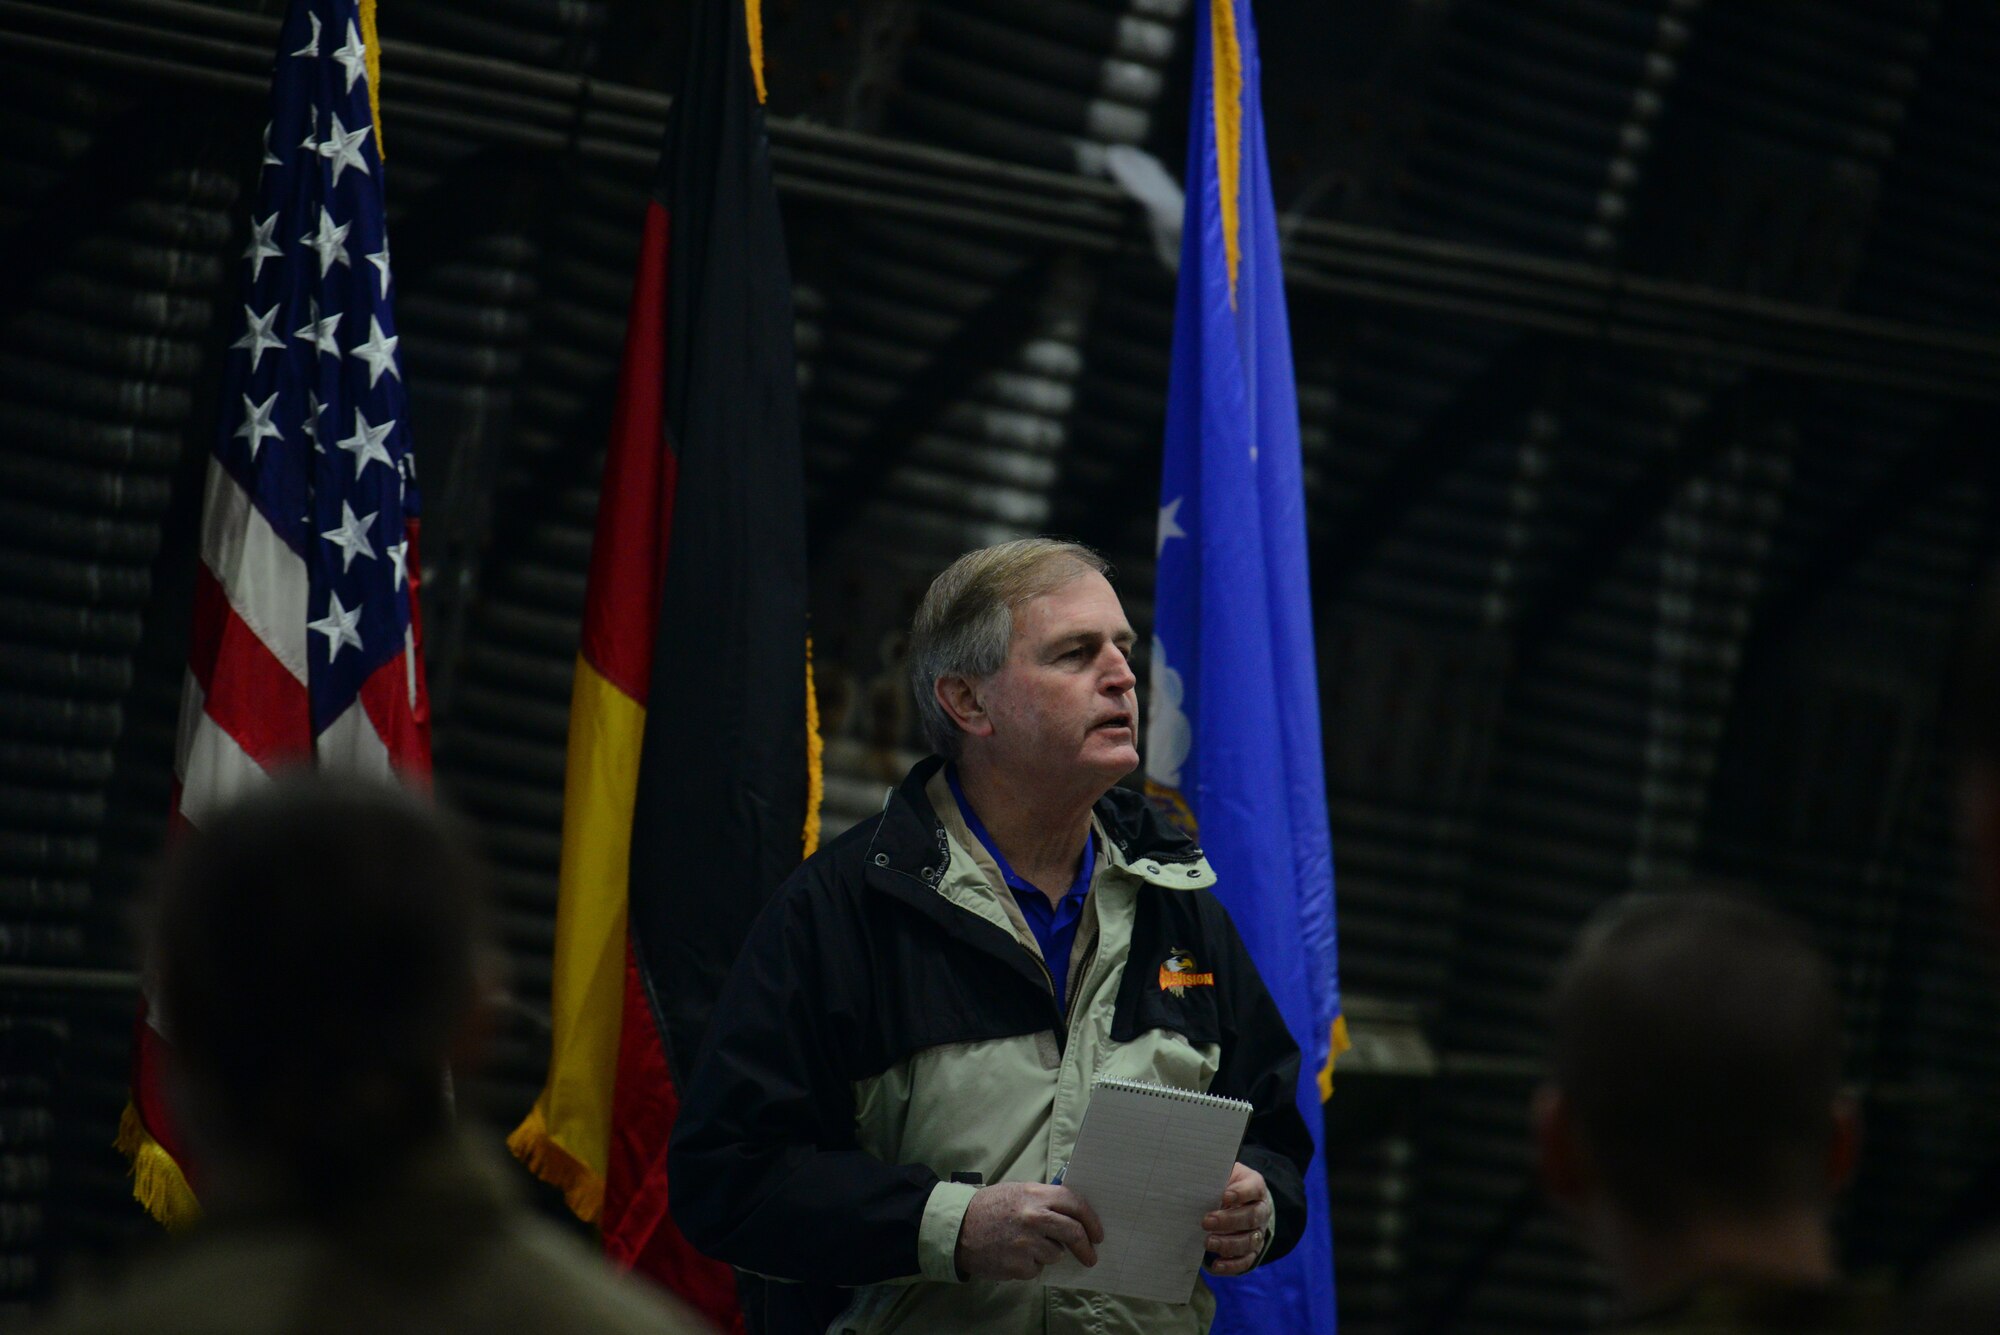 Jerry Brooks, Air Staff Eagle Vision One Project Office director, speaks to Airmen from the 24th Intelligence Squadron during a sunset ceremony at Ramstein Air Base, Germany, Jan. 28, 2020. Eagle Vision One used satellite imagery to support operations as well as aiding allies during natural disasters. (U.S. Air Force photo by Airman 1st Class Manuel Zamora)